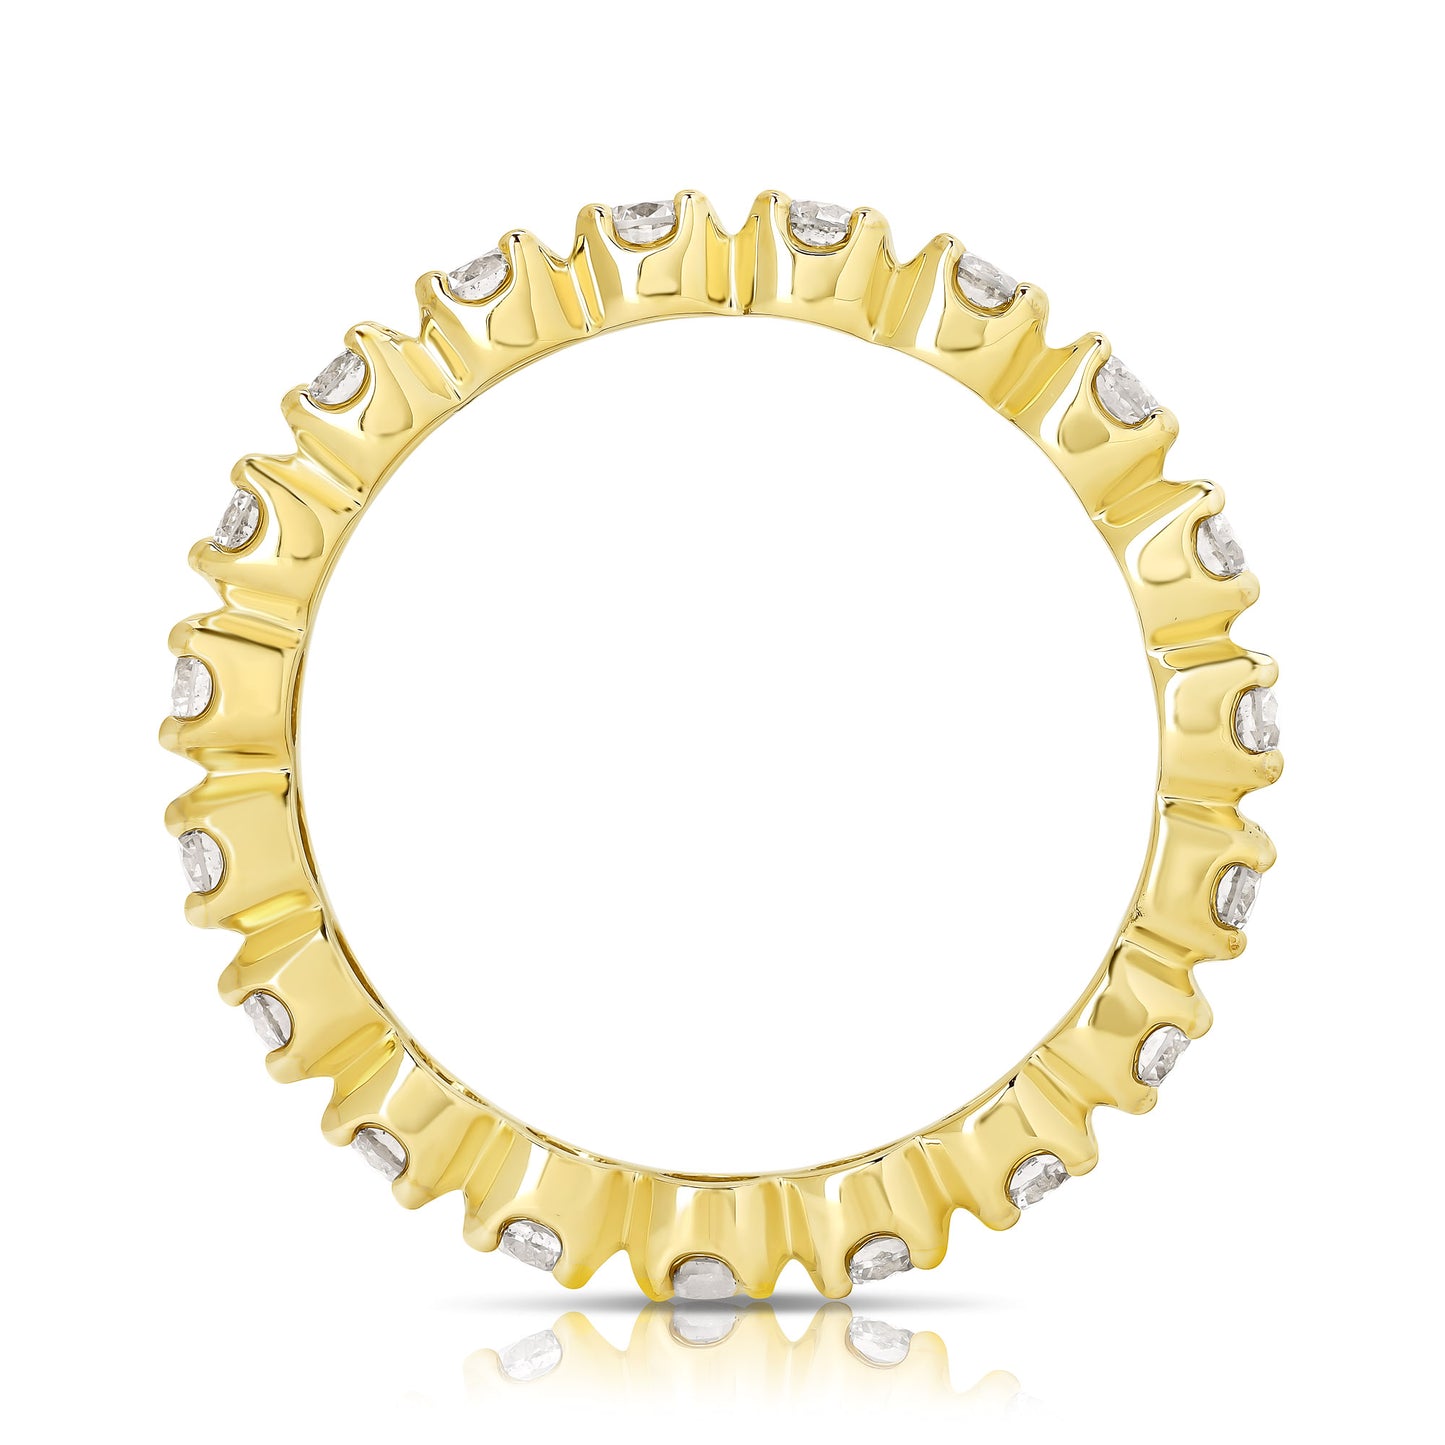 Load image into Gallery viewer, PREMIER 1 CT BUTTERCUP ETERNITY BAND
